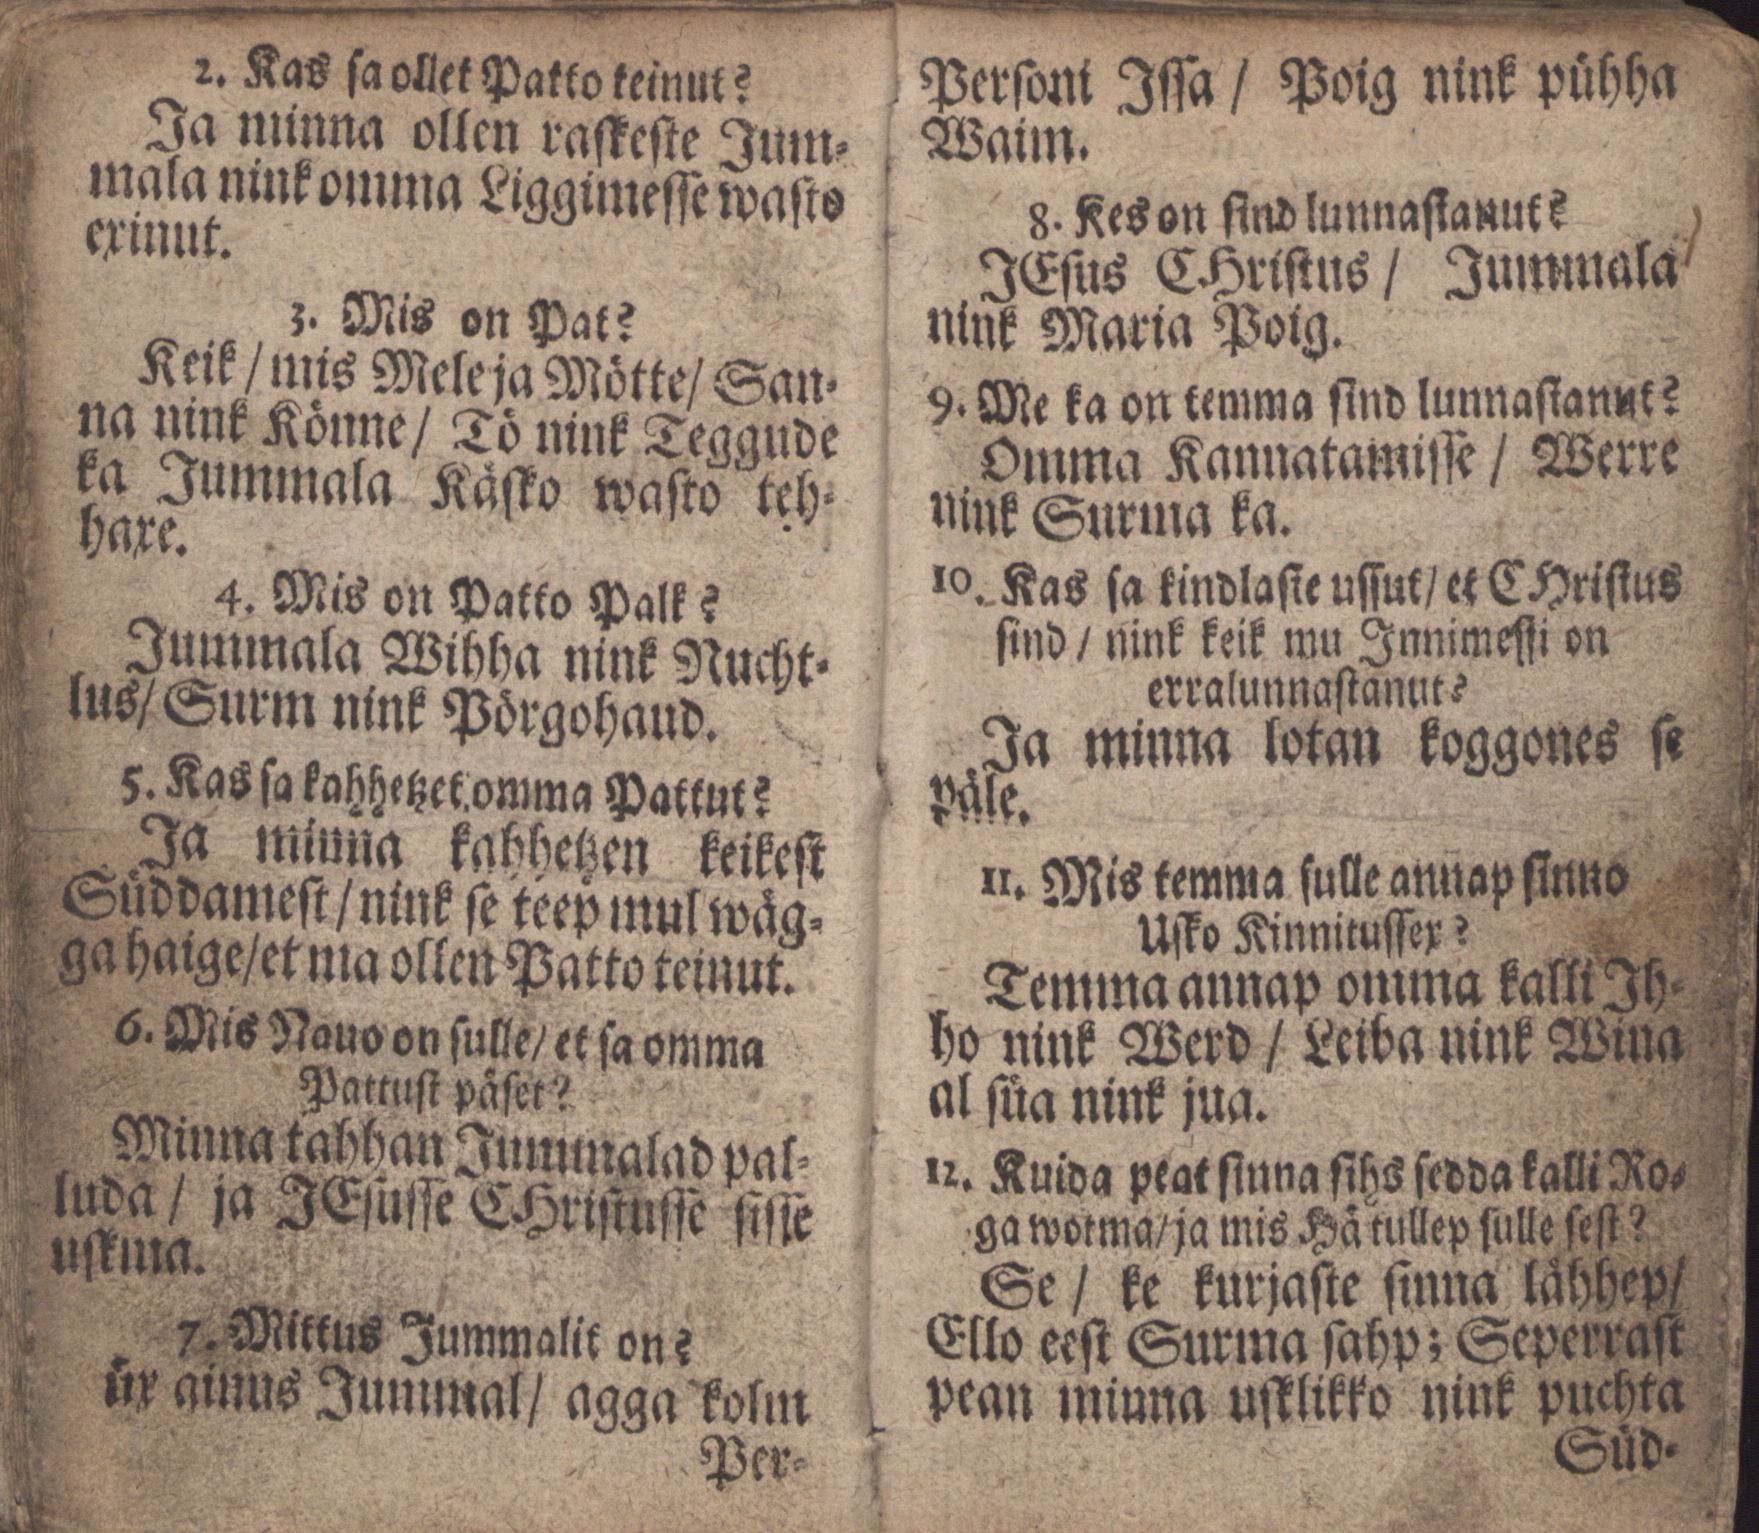 D. Mart. Lutterusse Katechismus (1700) | 22. Main body of text